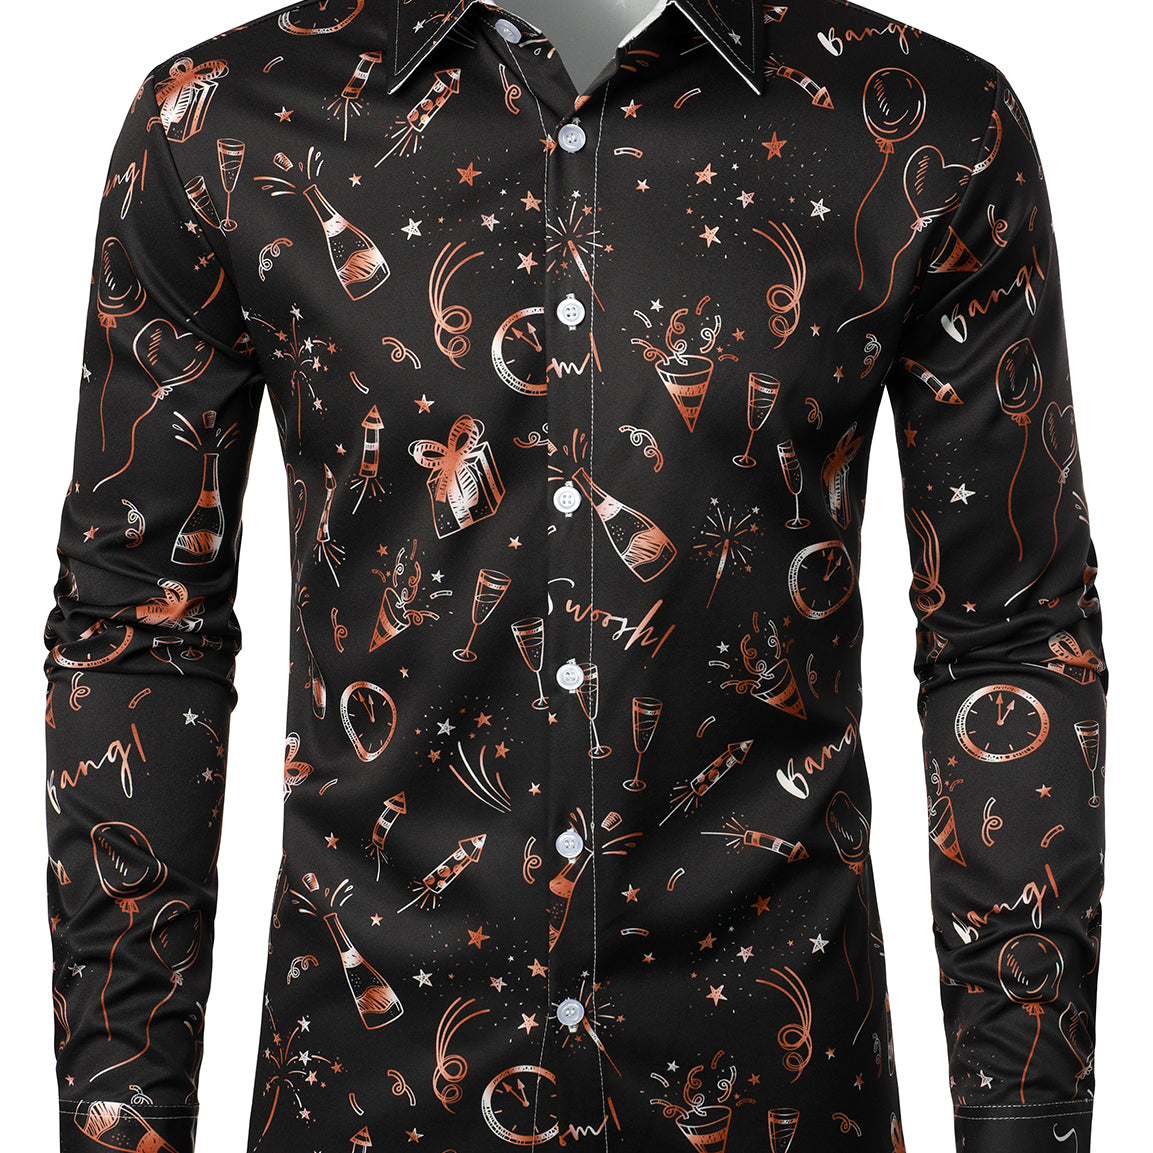 Men's Fireworks Holiday Funny New Year Party Button Up Long Sleeve Shirt